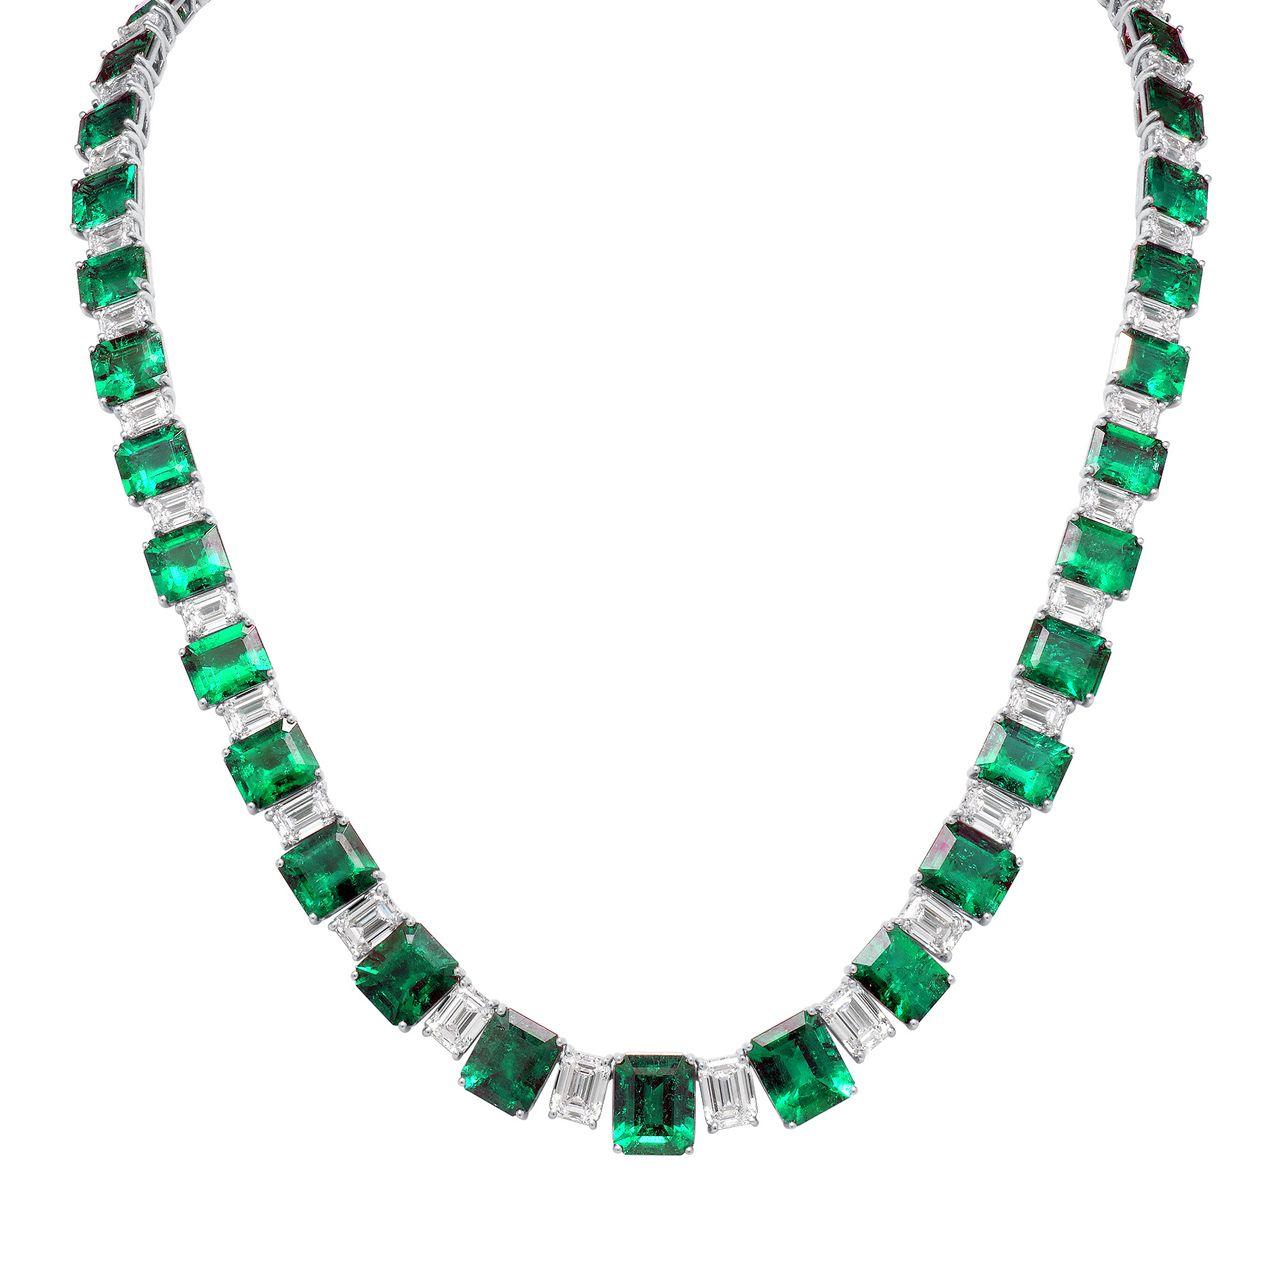 Exquisite Colombian Emerald Necklace: A True Masterpiece of Elegance and Luxury!

This stunning necklace features a breathtaking array of Colombian emeralds, totaling an impressive 55 carats, accompanied by sparkling diamonds weighing 20.50 carats.